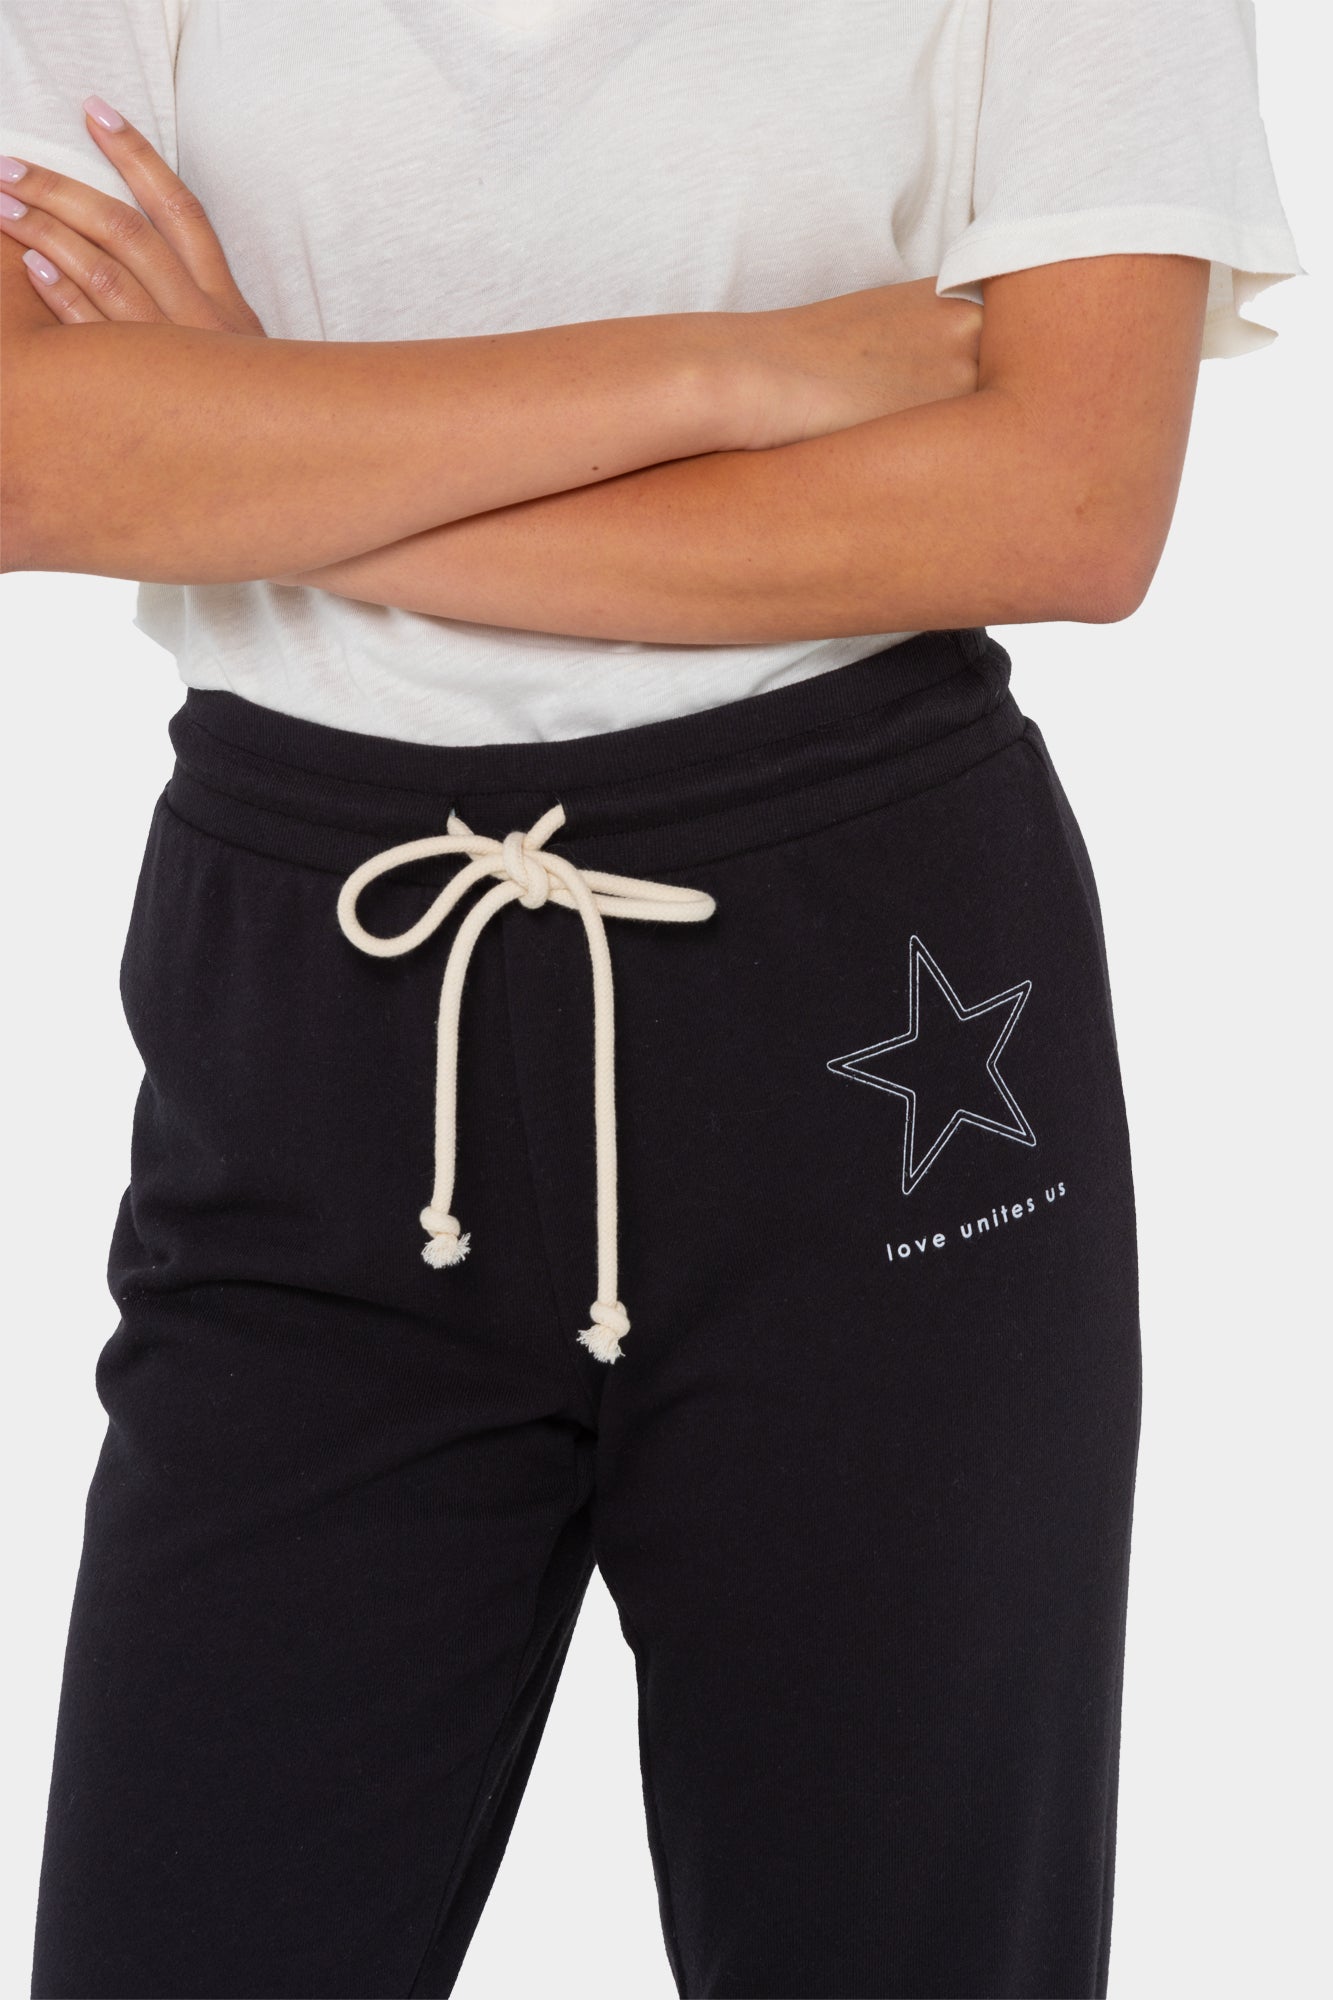 "Love Unites Us" French Terry Jogger